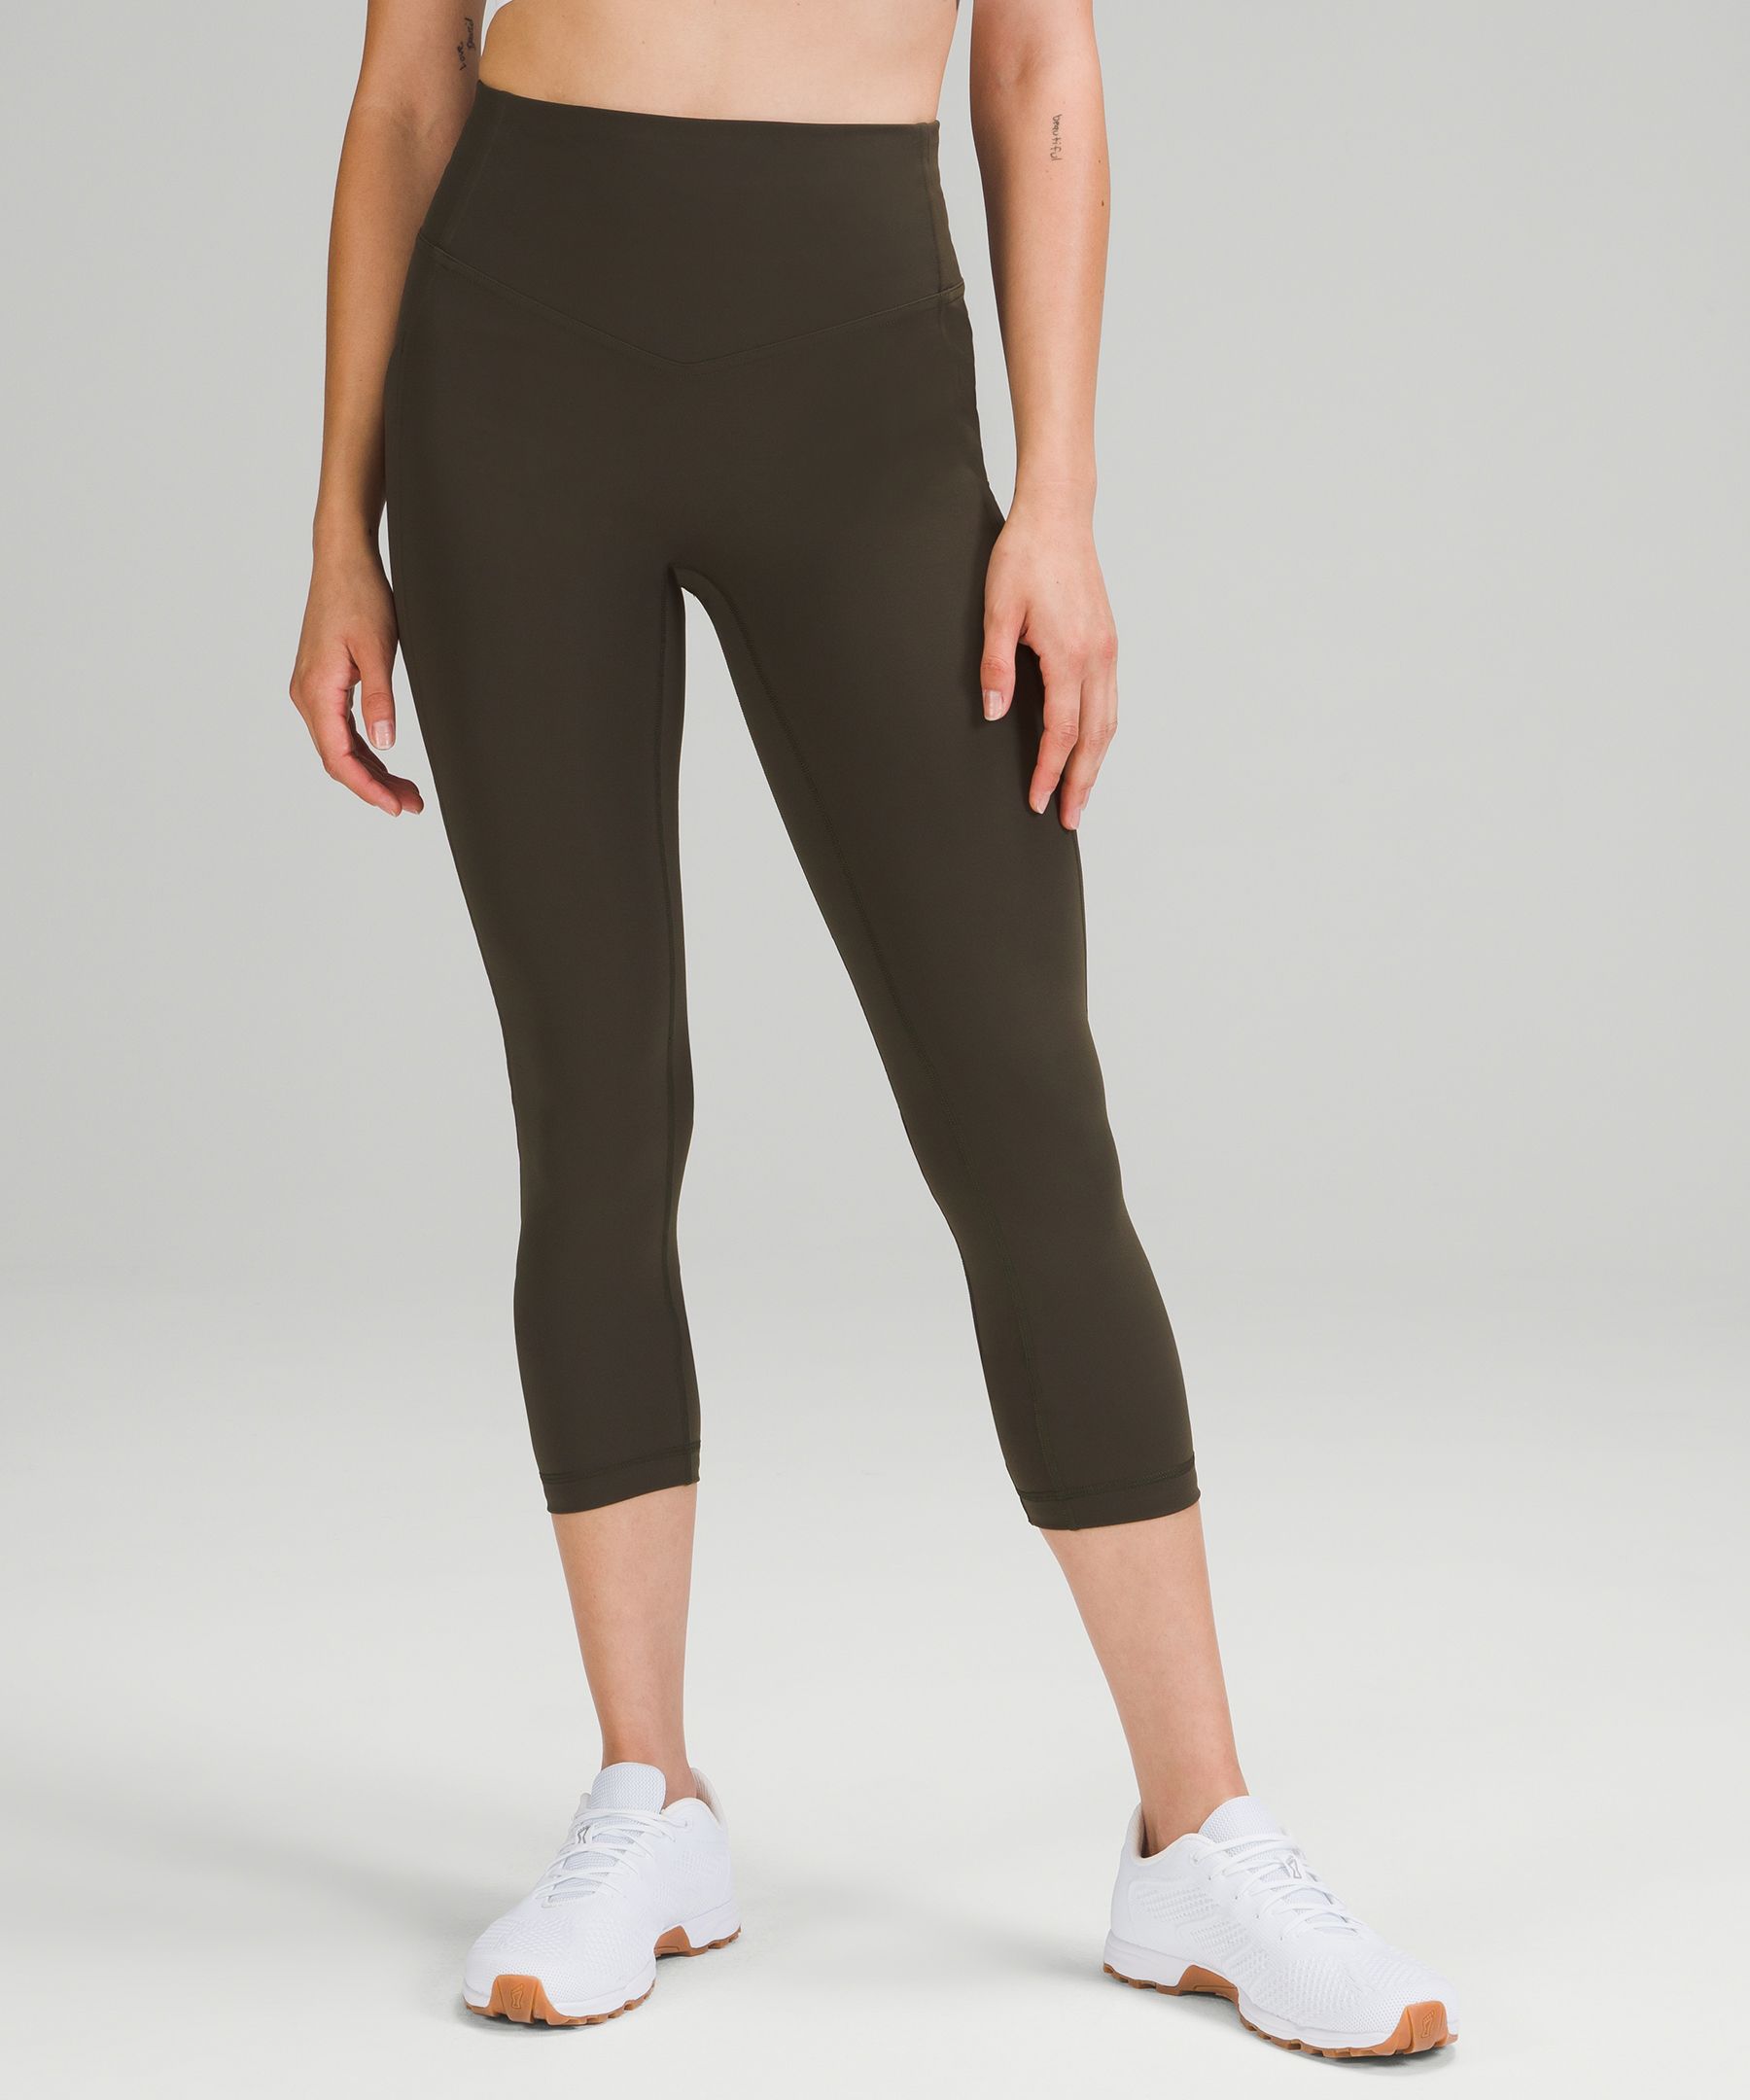 lululemon athletica, Pants & Jumpsuits, Nwt Lululemon All The Right Places  Crop 23 Size 2